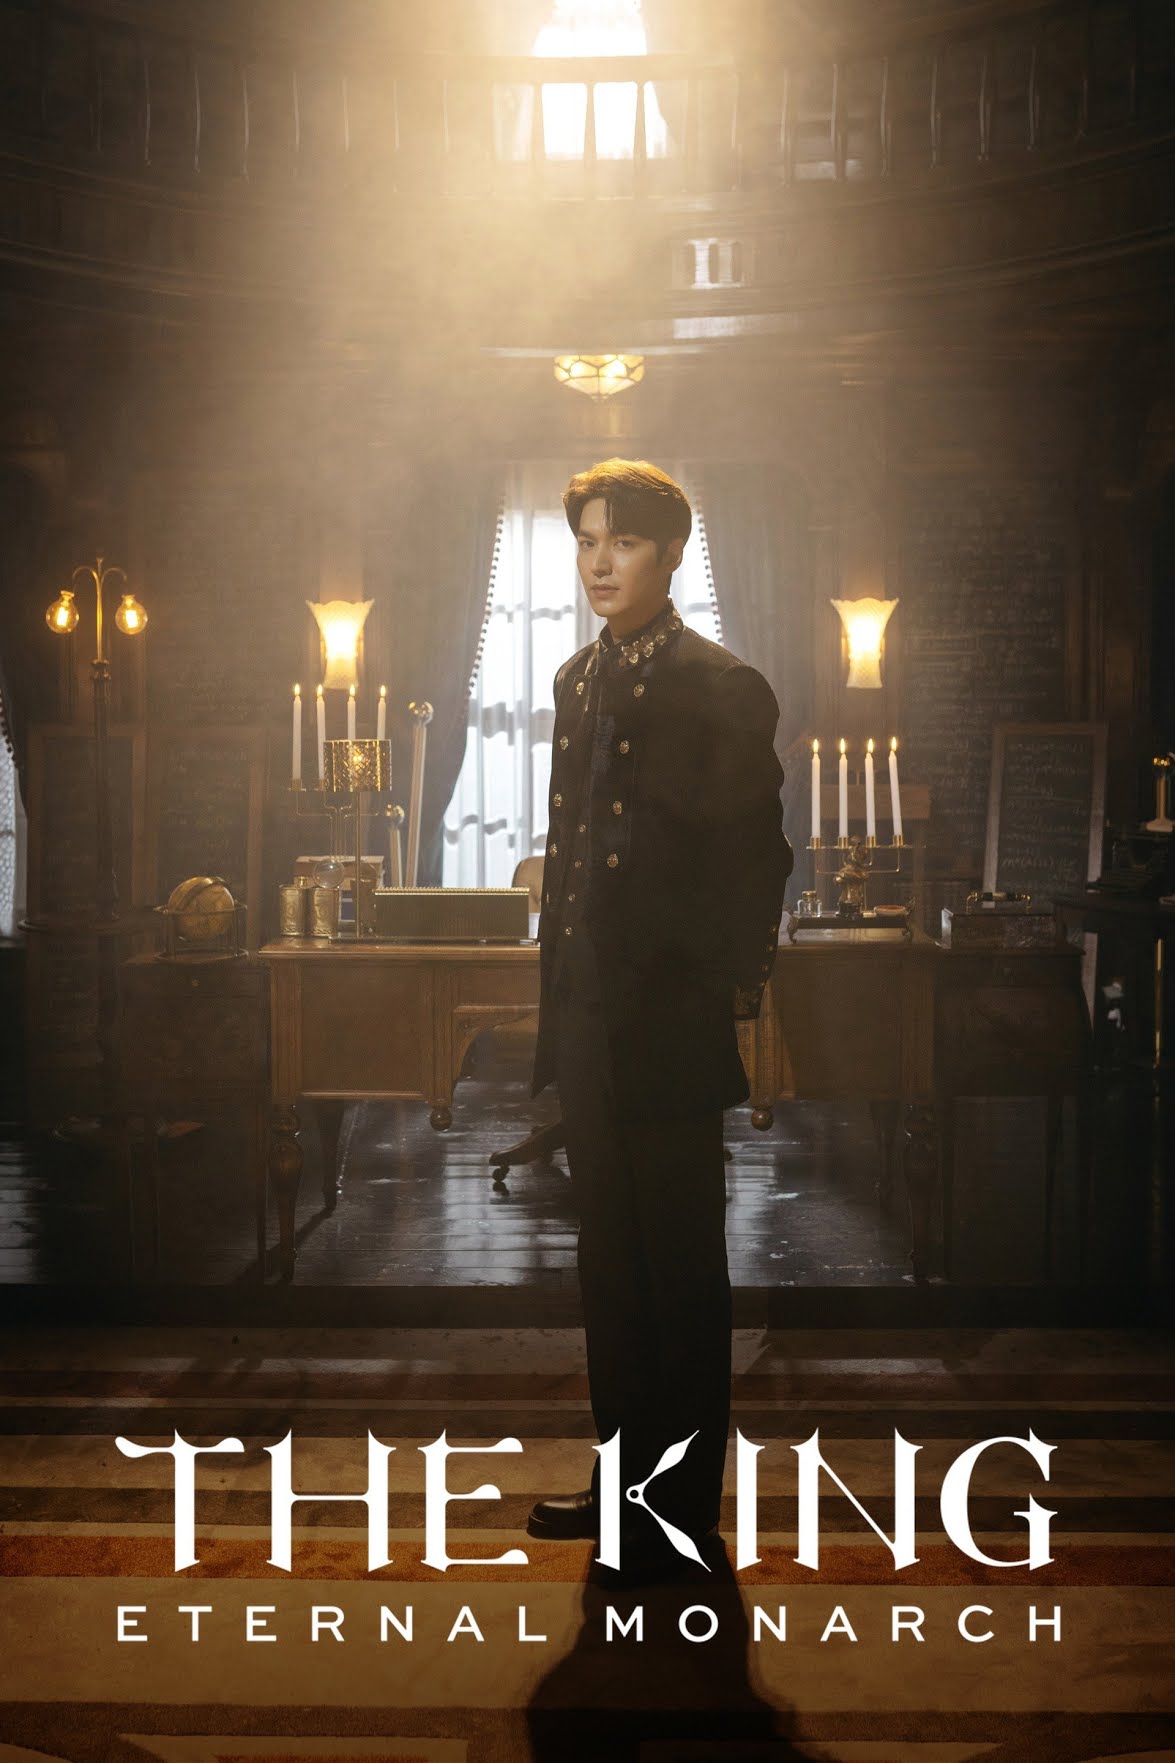 Download The King: Eternal Monarch S01 2020 Web Series Hindi Dubbed NF WebRip All Episodes 480p | 720p